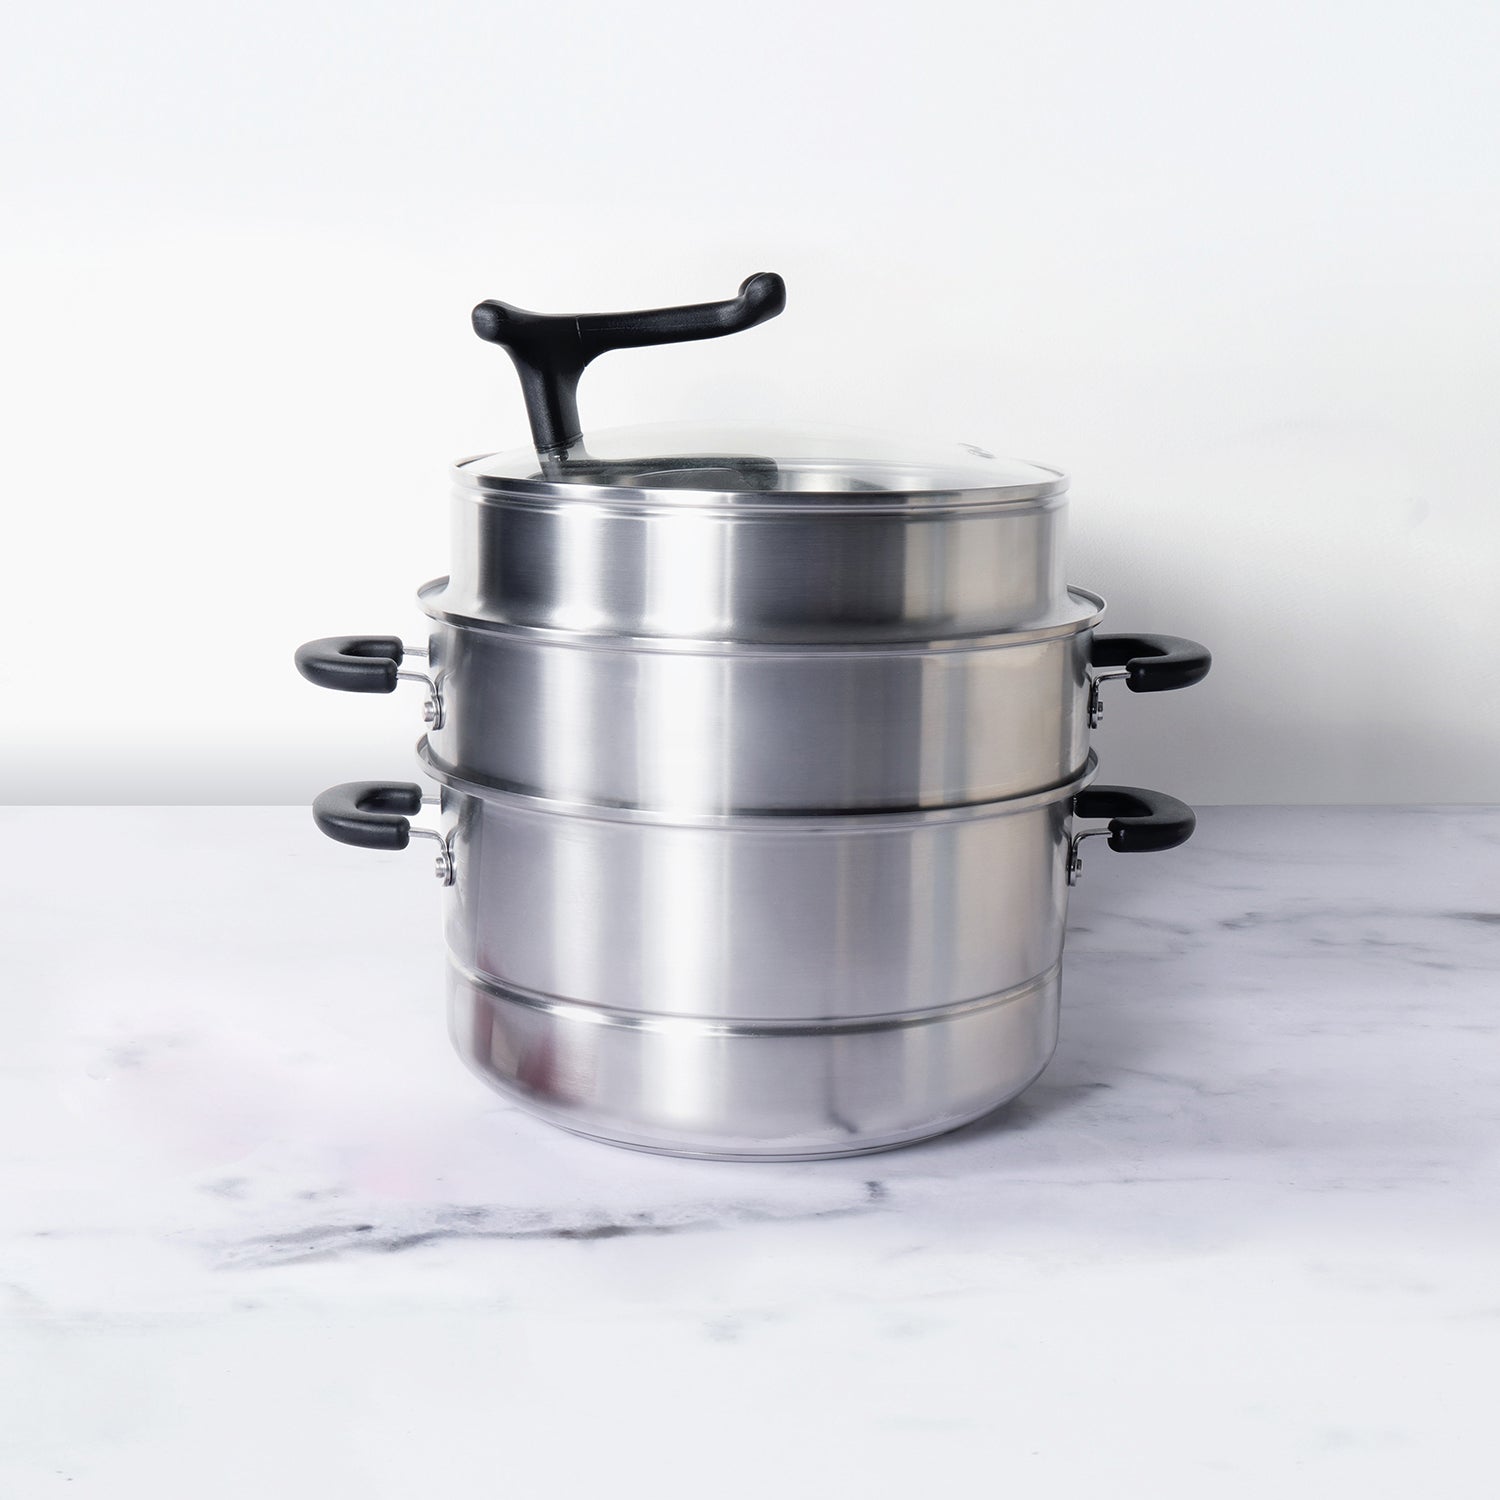 Meyer 3-in-1 Multi Steamer - Pots and Pans